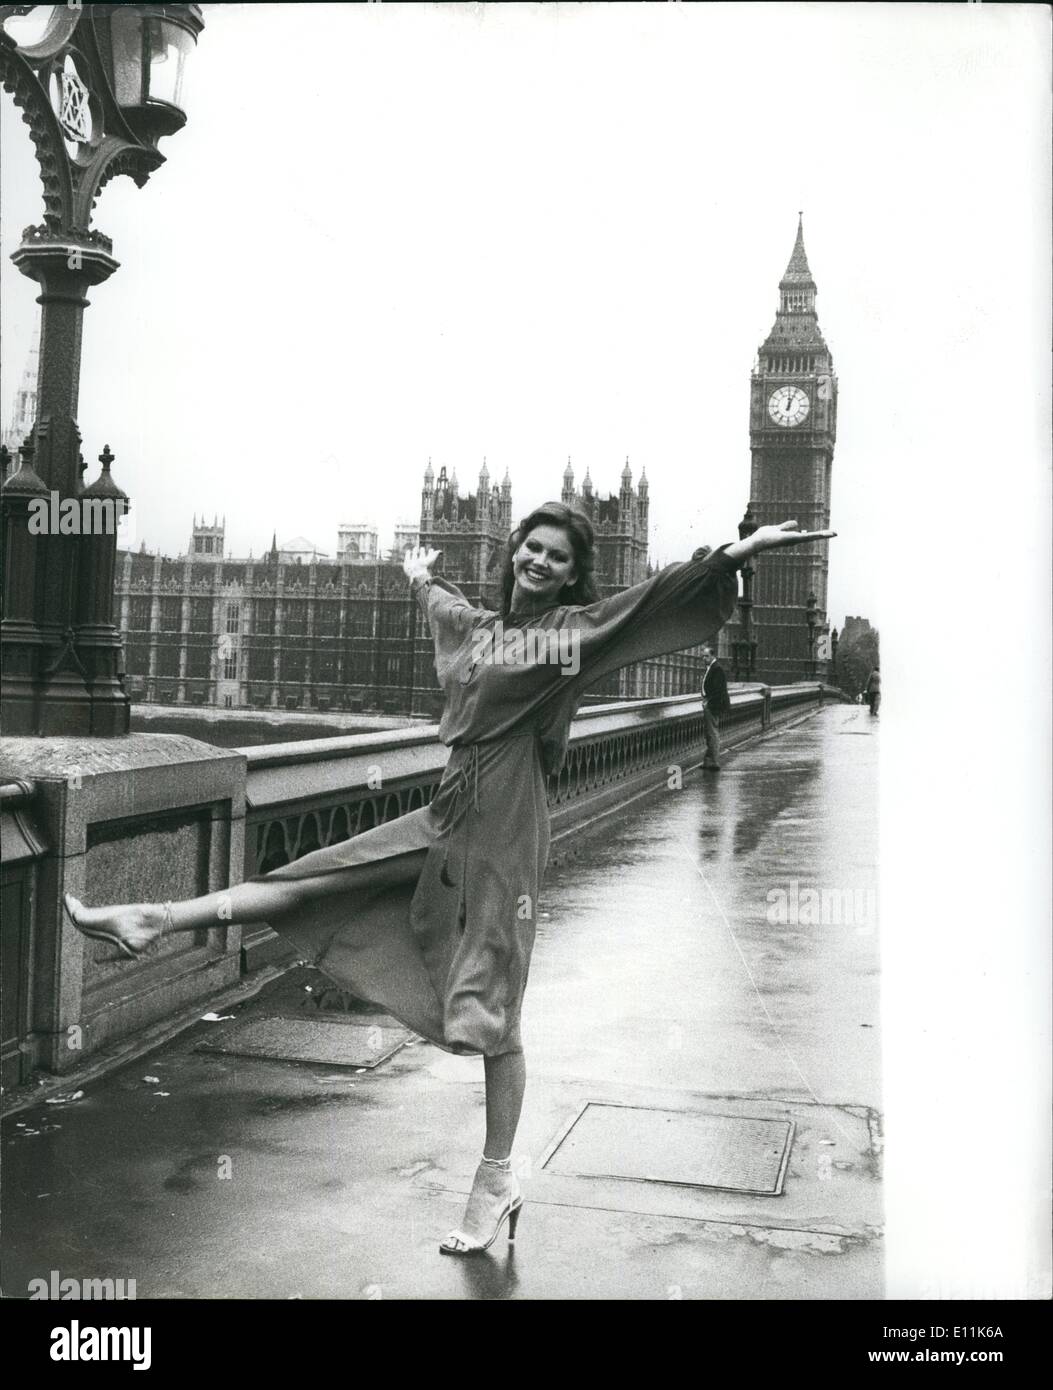 Sep. 09, 1978 - Miss Universe Visits London: Margaret Gardiner, from Capetown, the 19-year-old reigning Miss Universe spend a few hours visiting the wights of London yesterday she as on a stopover tour en route from Miami to Johannesburg. Photo shows Margaret Gardiner 'Miss Universe' shows off her delightful legs on Westminster Bridge showing the Houses of Parliament, during her short visit to London yesterday. Stock Photo